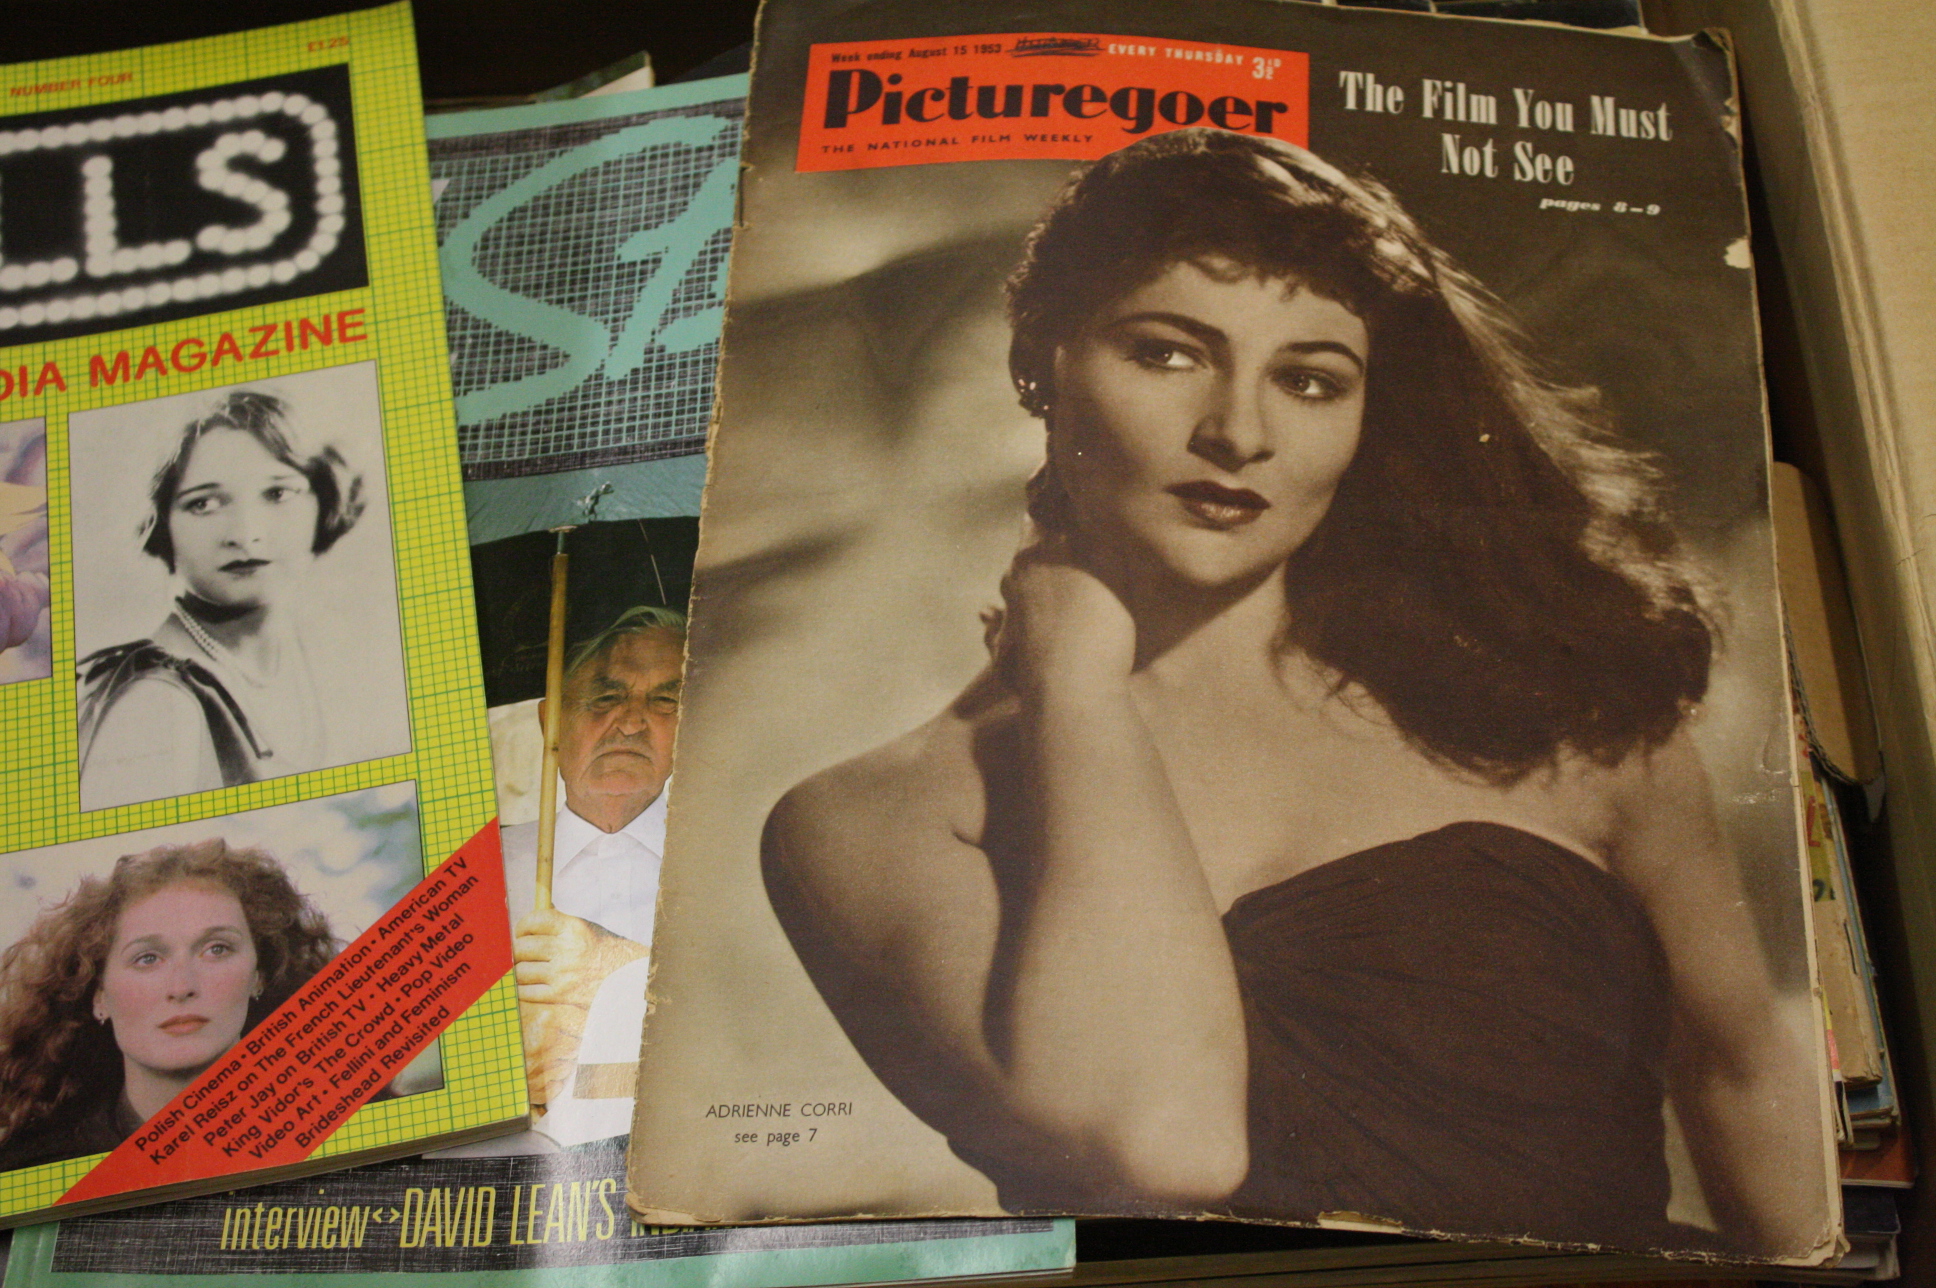 A collection of mixed film magazines to include Picturegoer Weekly, Film in London, ABC Film Review - Image 4 of 5